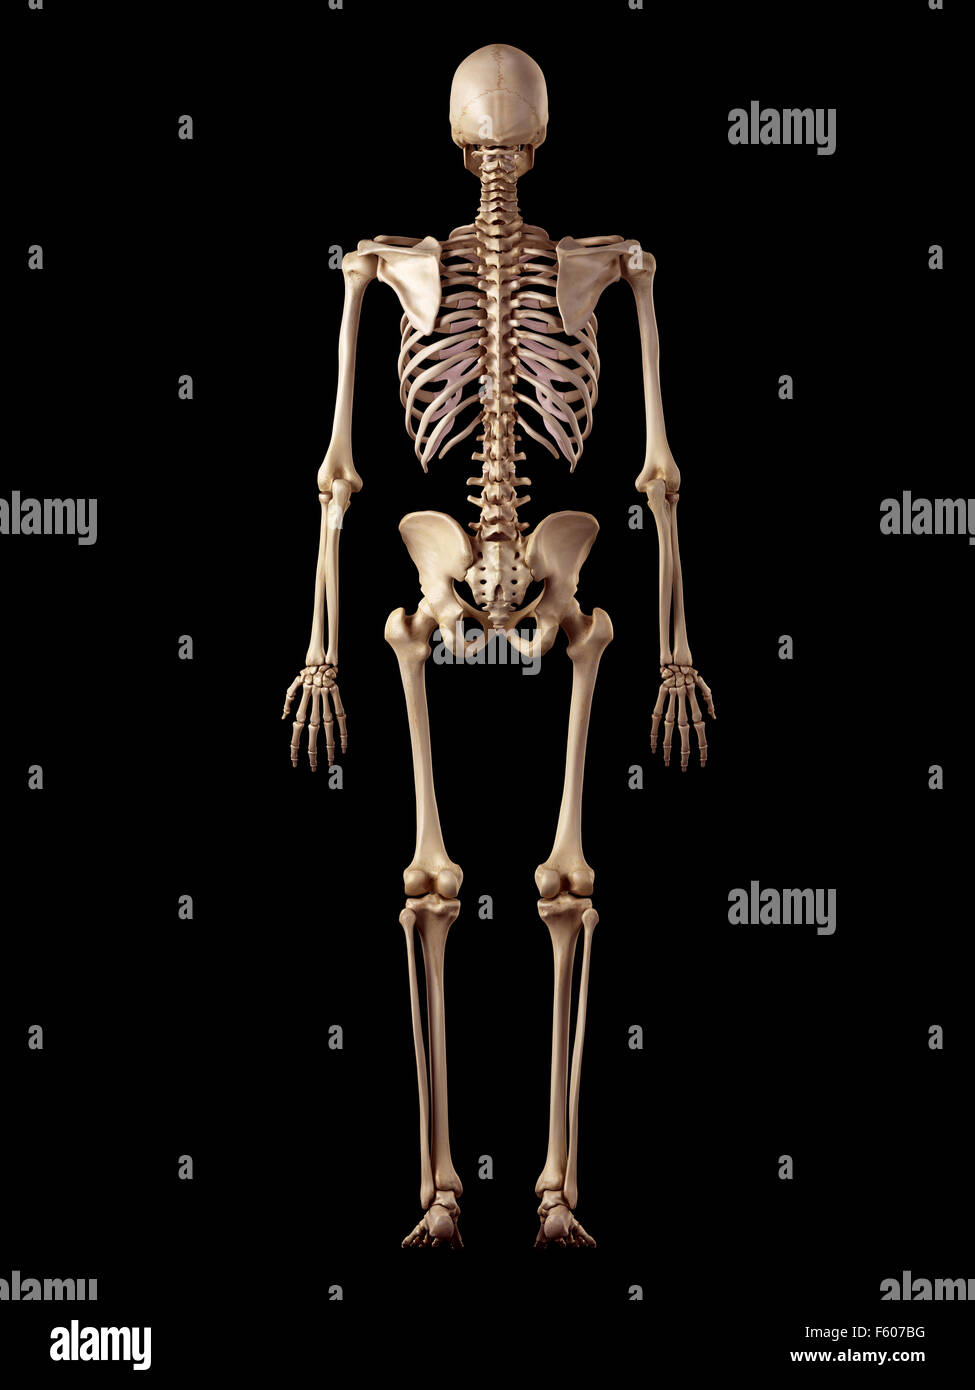 Human Skeleton Back High Resolution Stock Photography and Images - Alamy